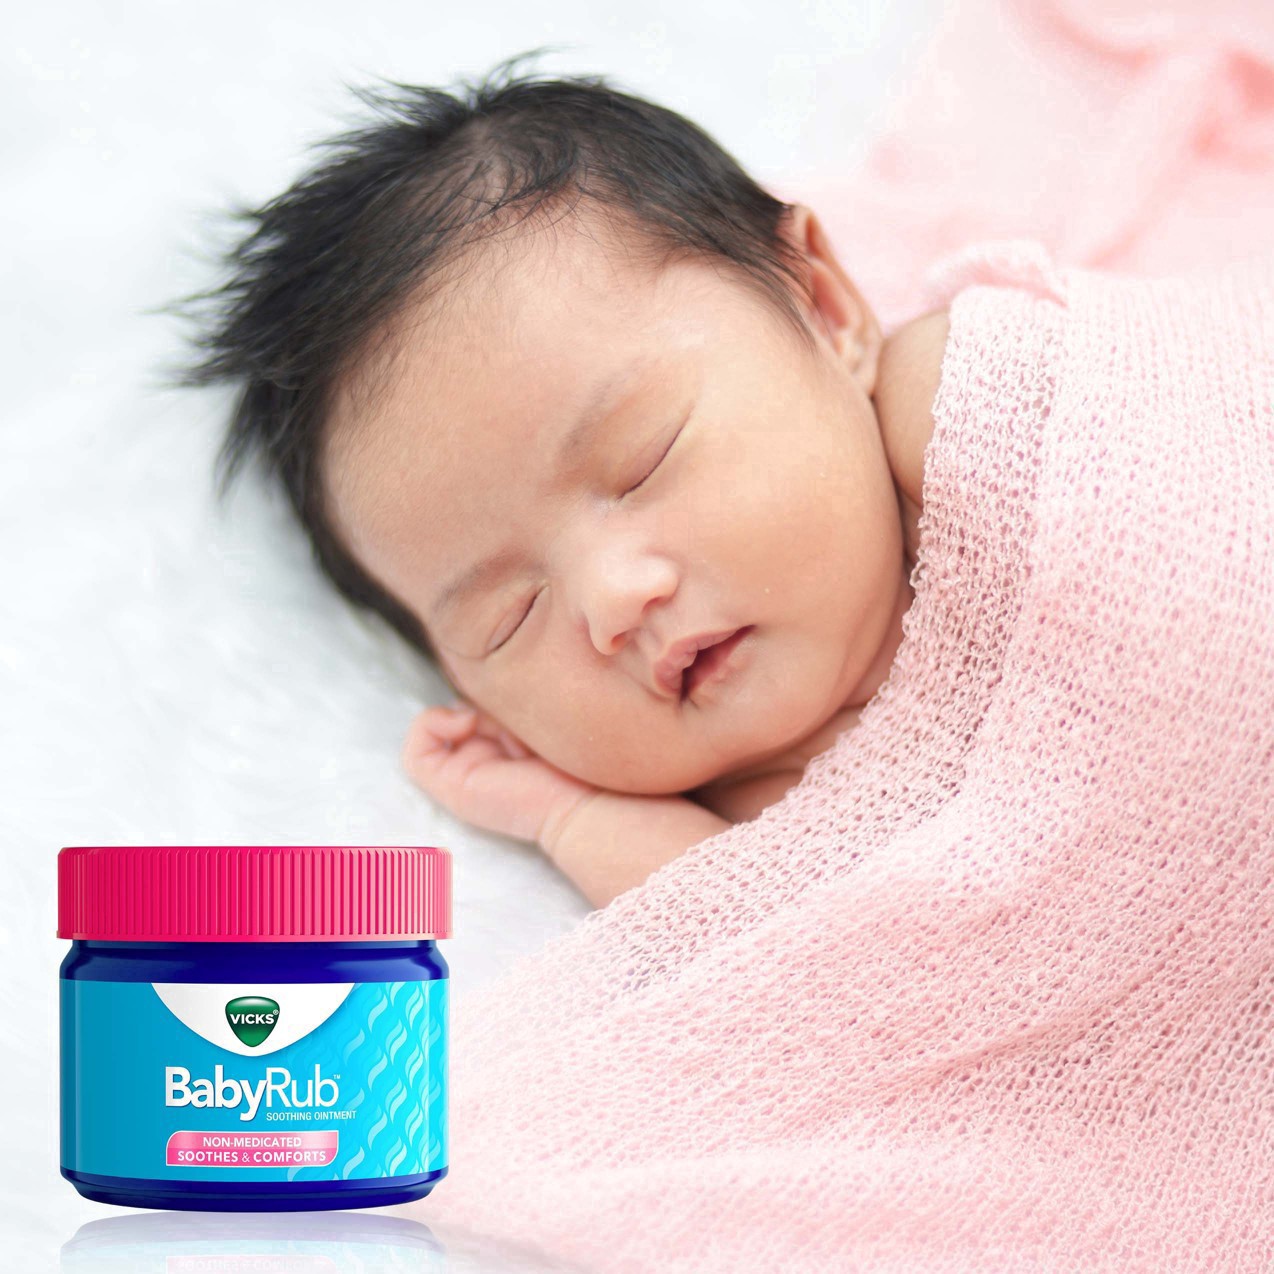 slide 39 of 78, Vicks BabyRub, Chest Rub Ointment with Soothing Aloe, Eucalyptus, Lavender, and Rosemary, from The Makers of VapoRub, 1.76 oz, 1.76 oz